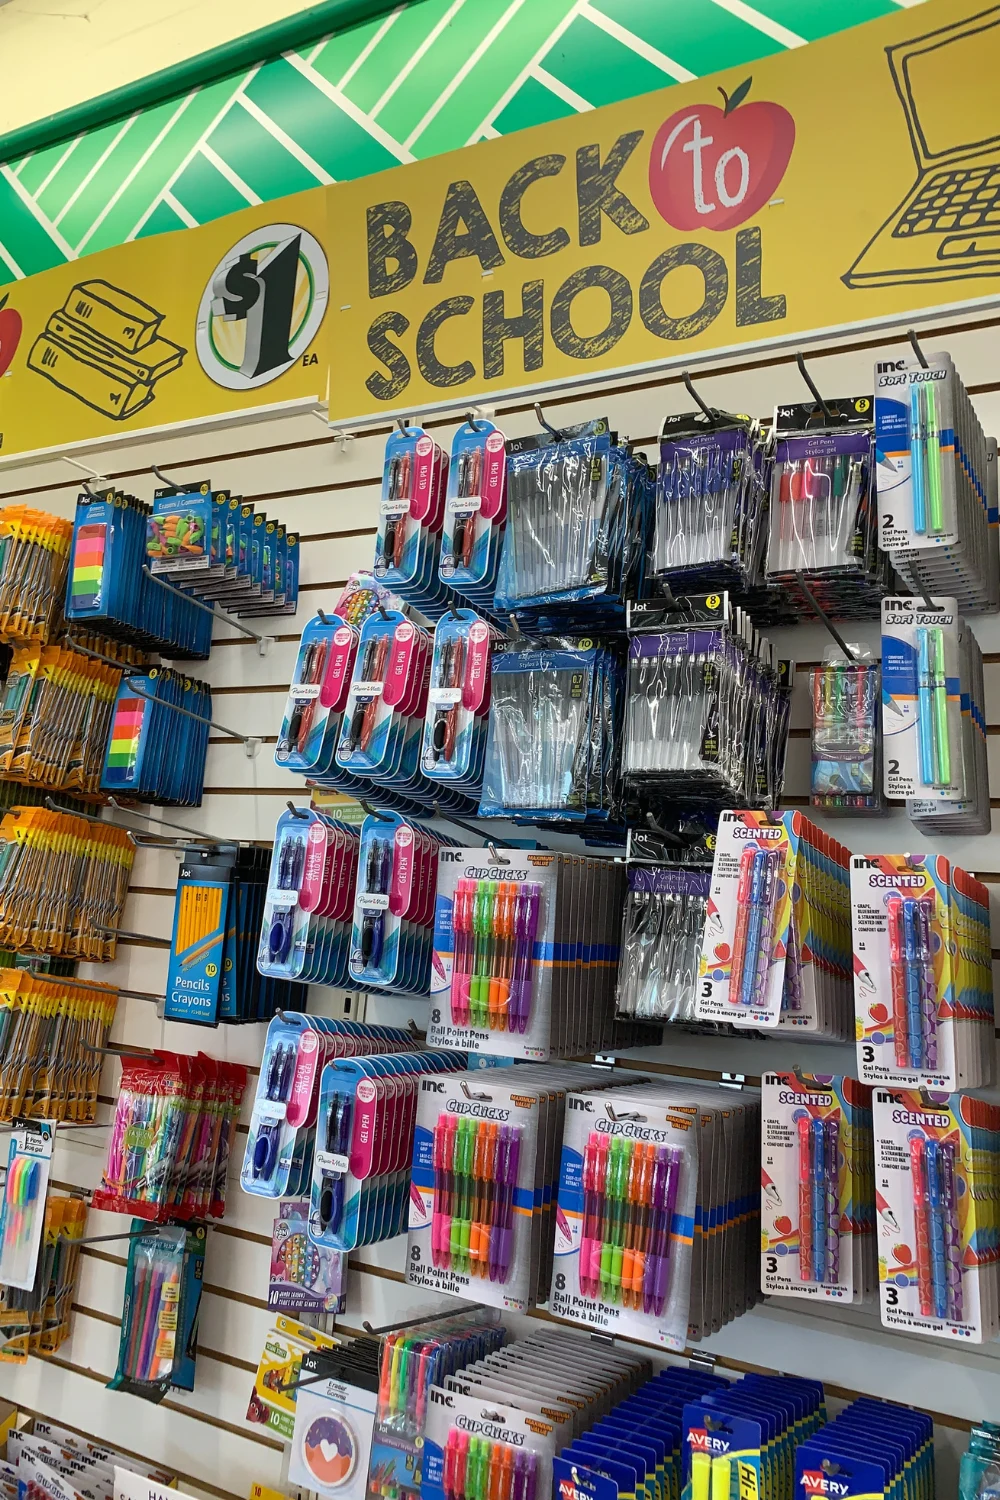 https://imbusyshopping.com/wp-content/uploads/2022/07/Back-to-Schools-Supplies-at-Dollar-Tree-Images-6.png.webp